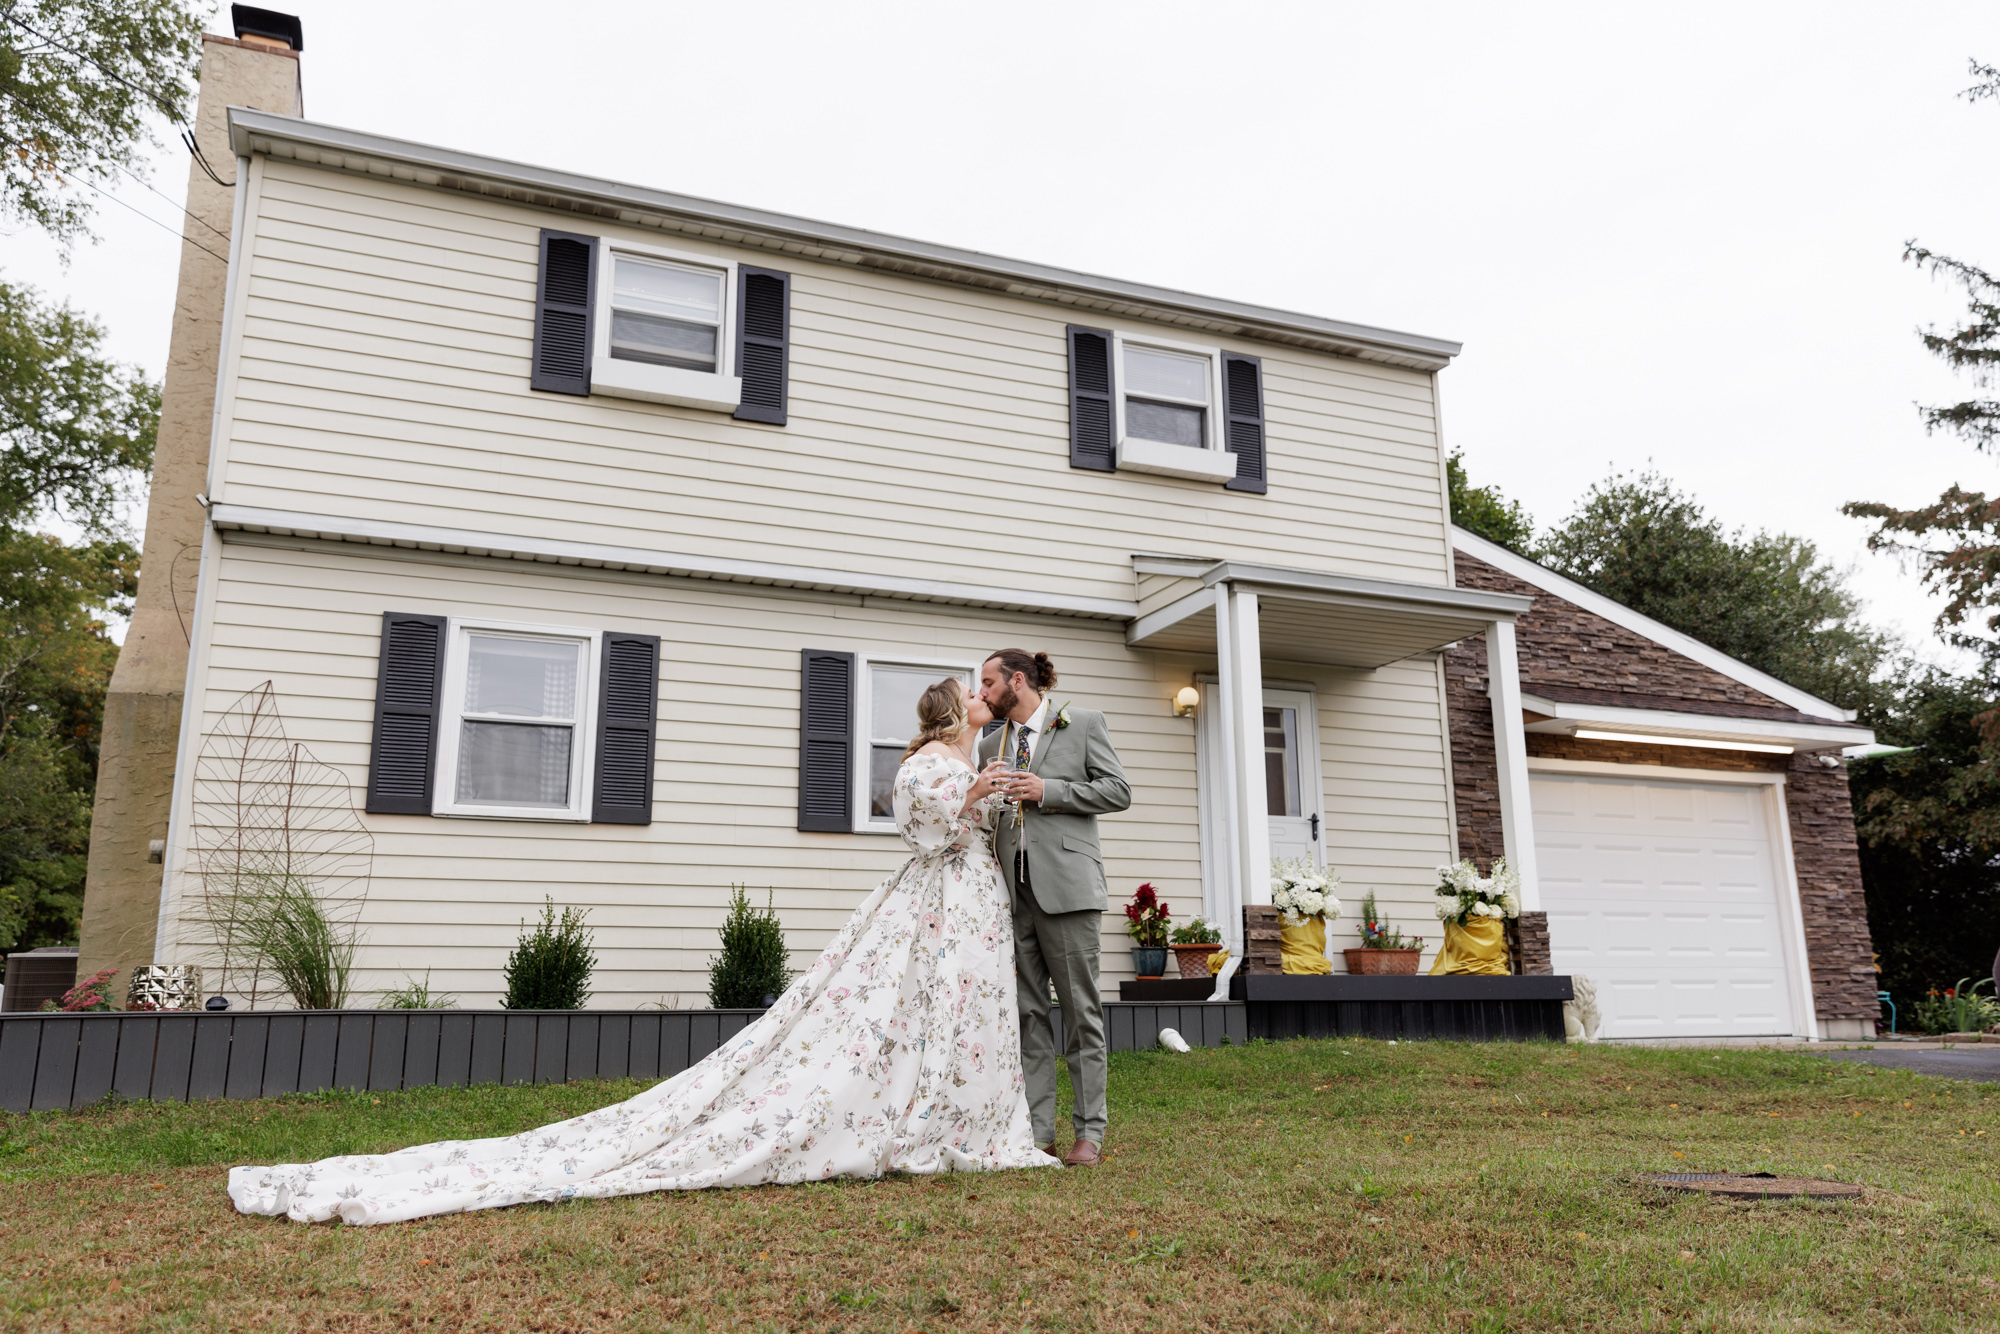 Bride in a full, long floral Monique Lluillier gown and groom in a light colored suit in a formal pose in front of their two story house in New Jersey